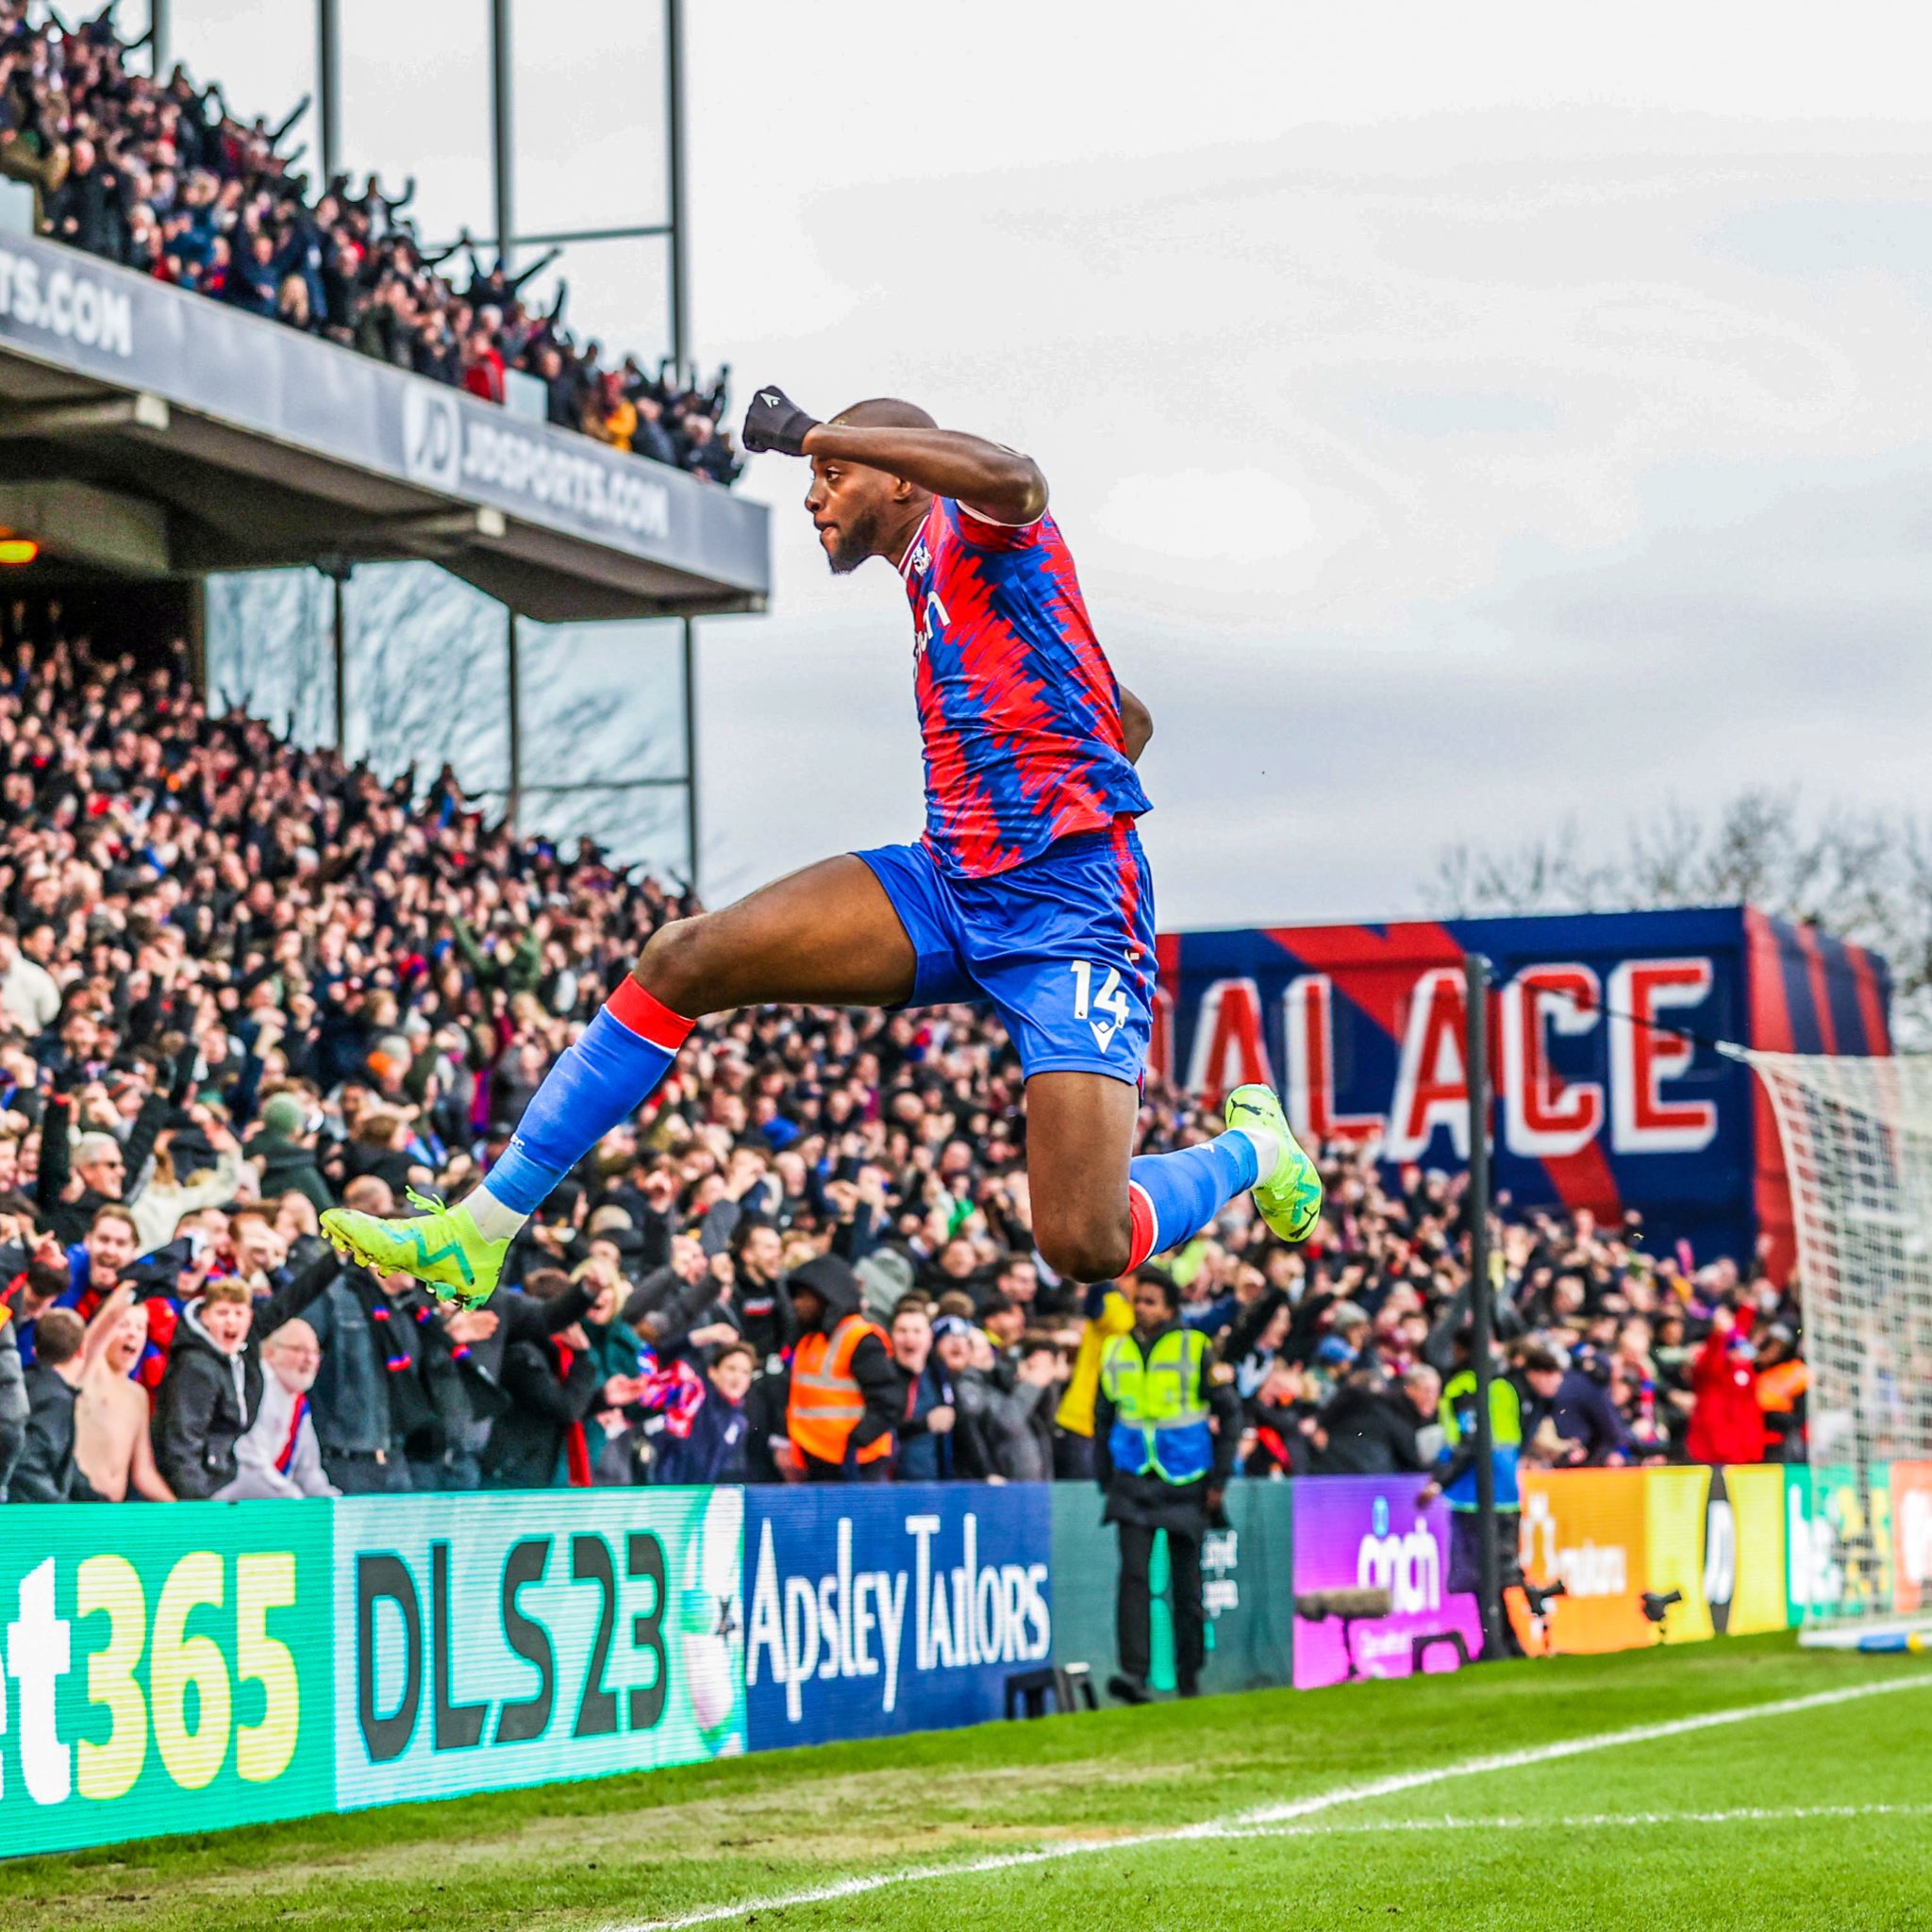 Crystal Palace 2 - 1 Leicester City